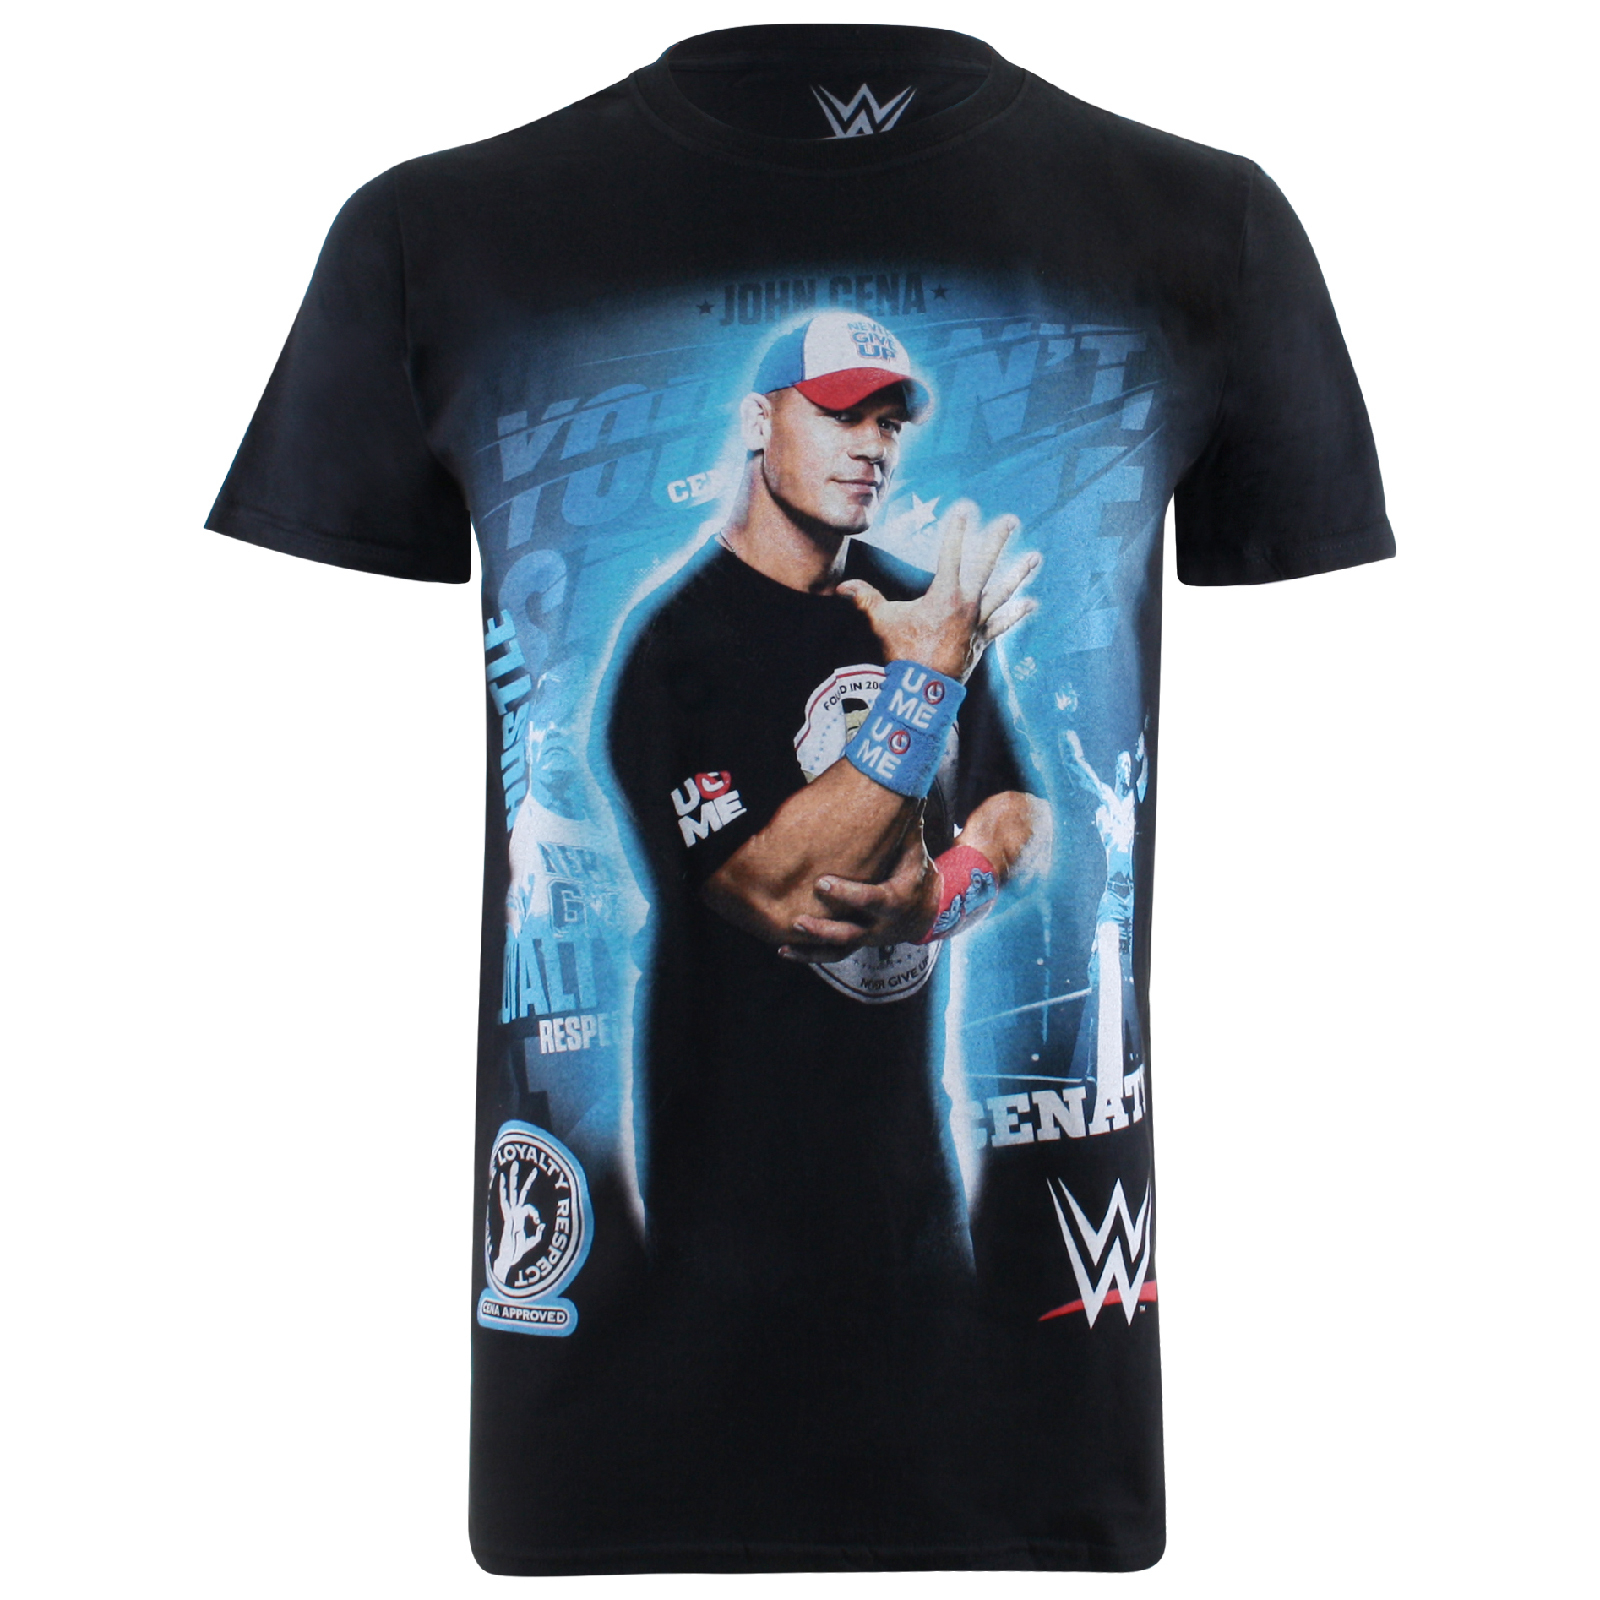 T-Shirt Homme WWE Cant See Me - Noir - XXL